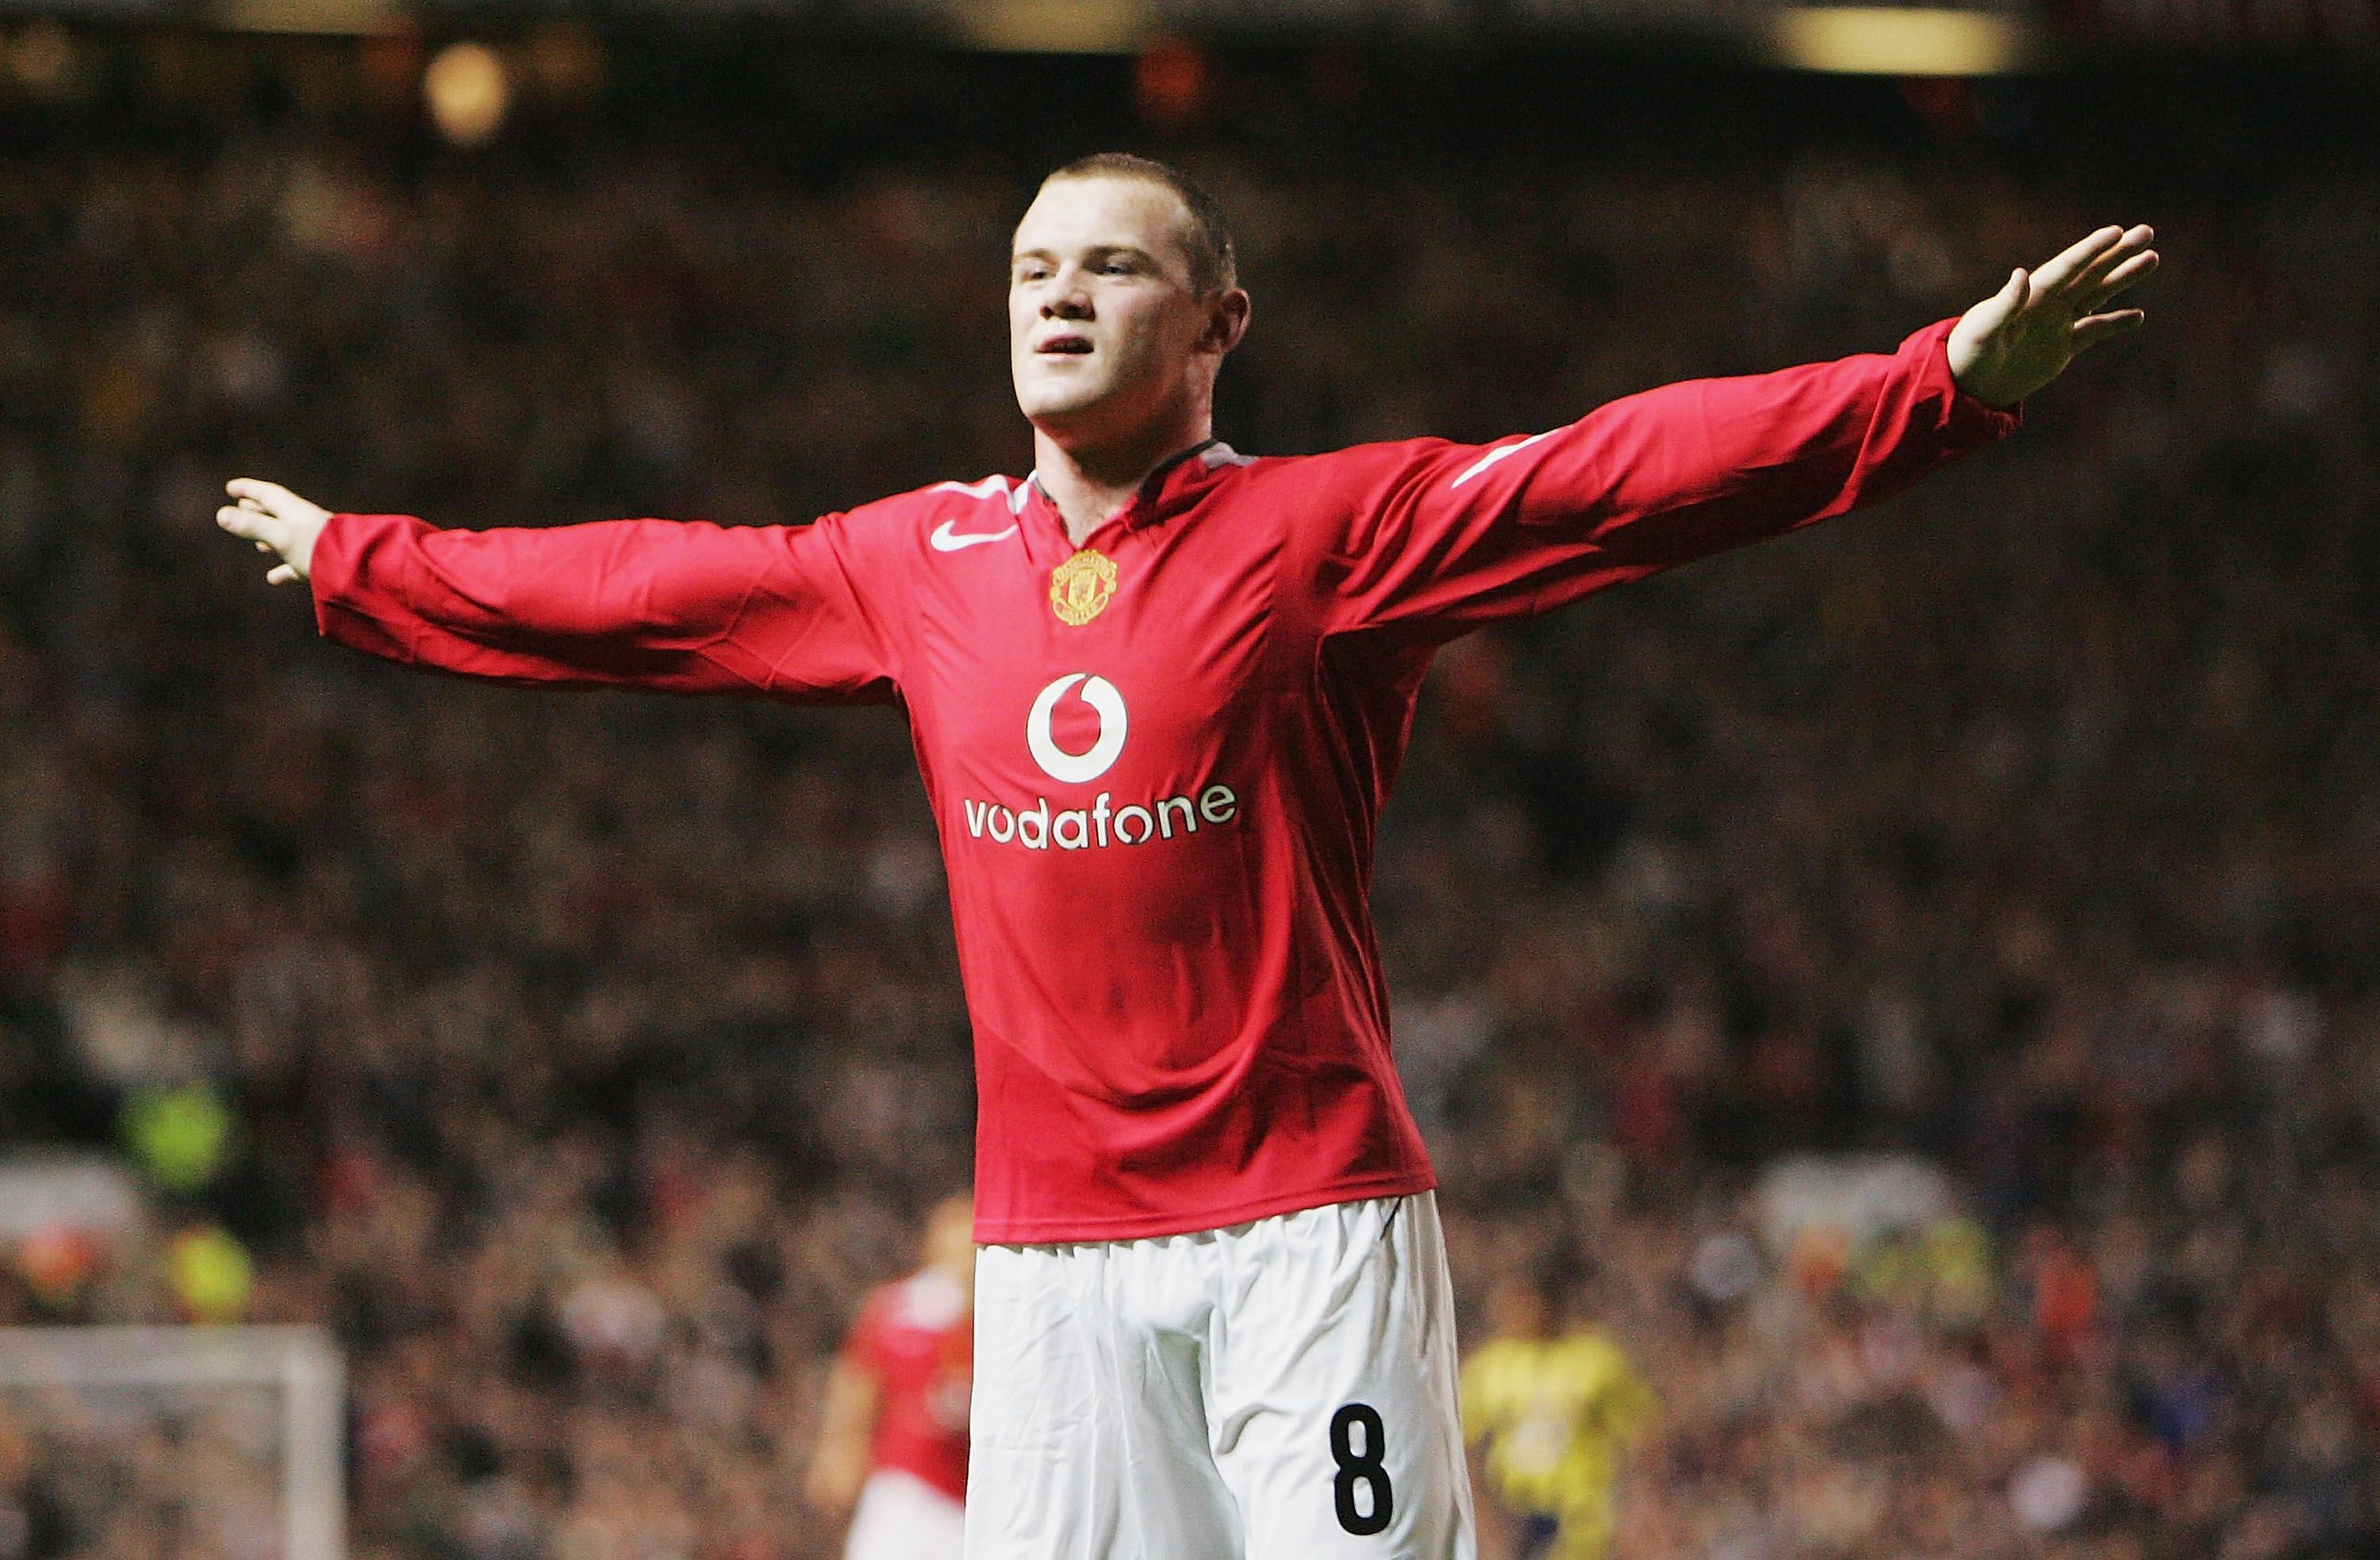 Wayne Rooney became an all-time great at Manchester United